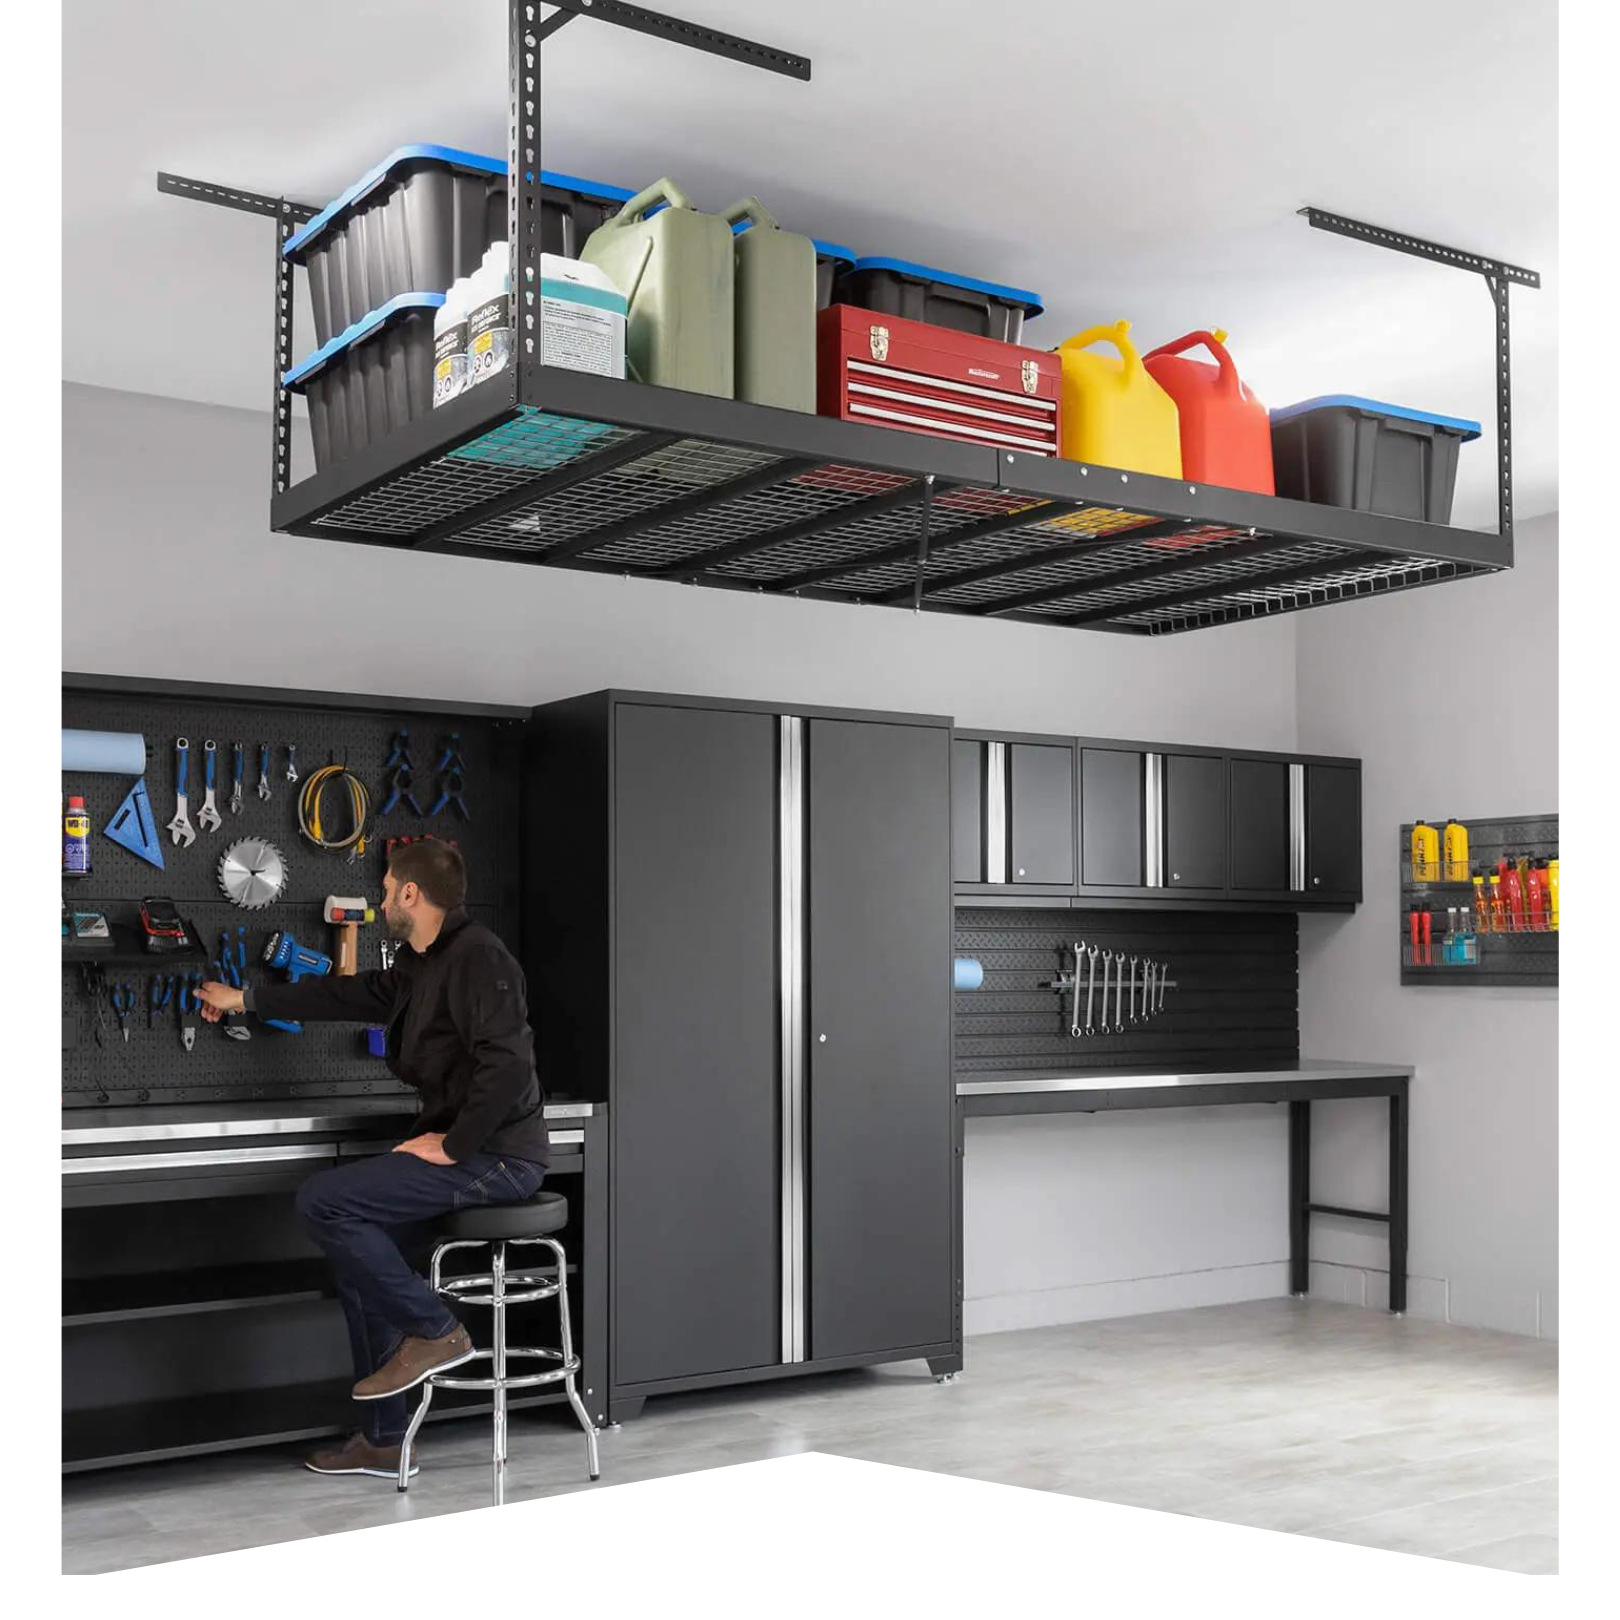 man seated in pristine garage with black cabinets and overhead storage